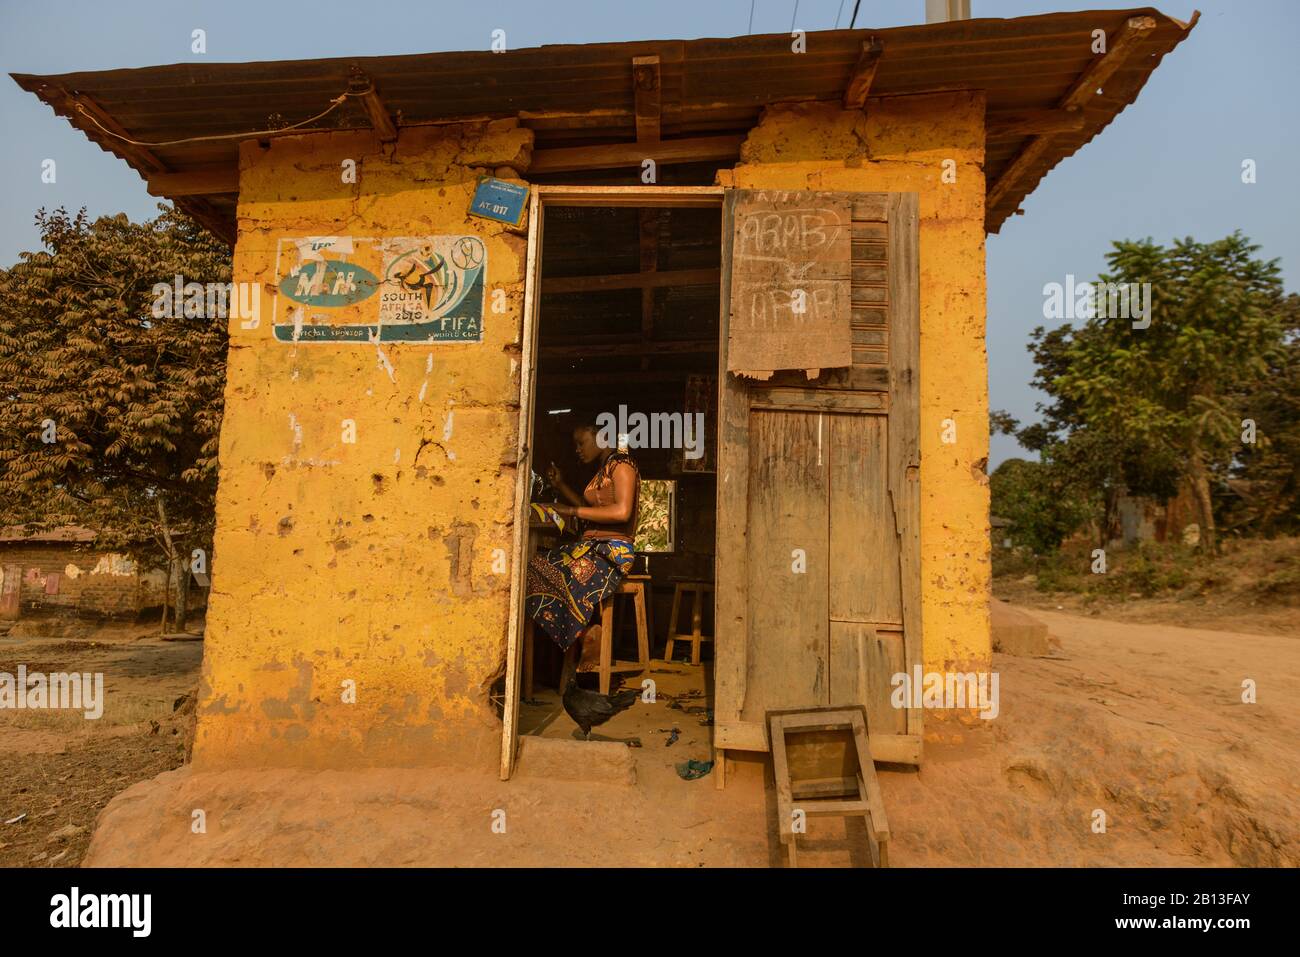 A dressmaker in the southern half of Democratic Republic of Congo,Africa Stock Photo